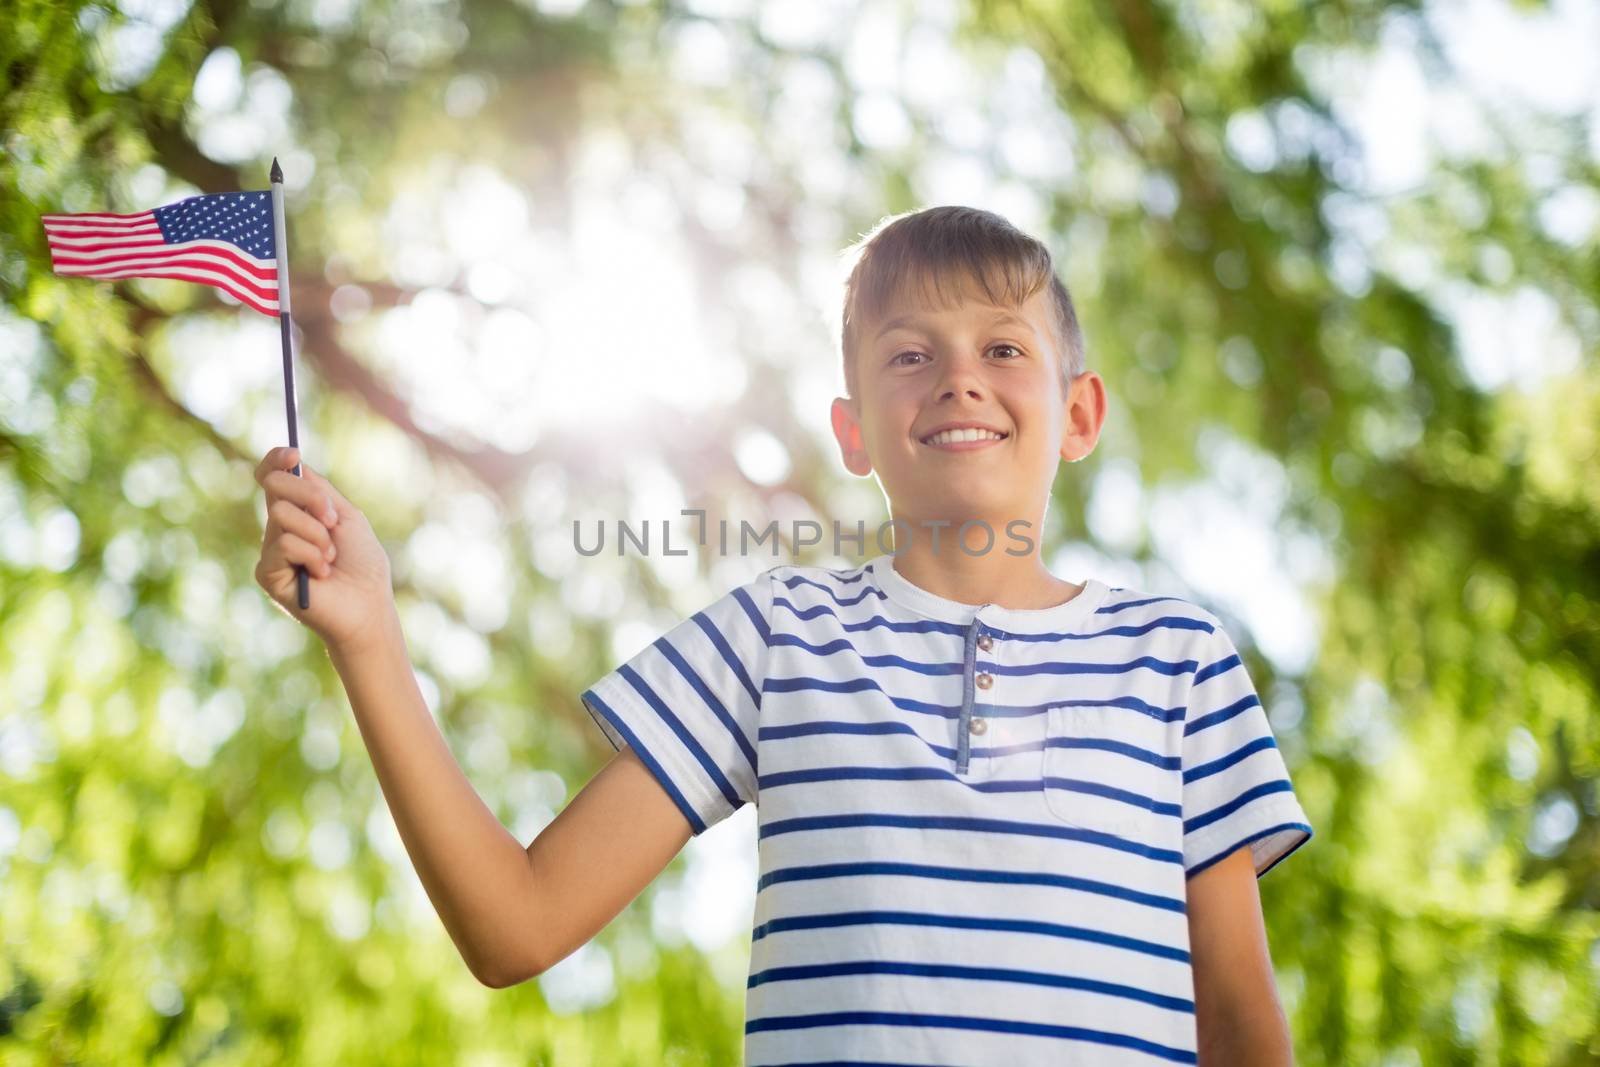 Boy holding small american flag in a park